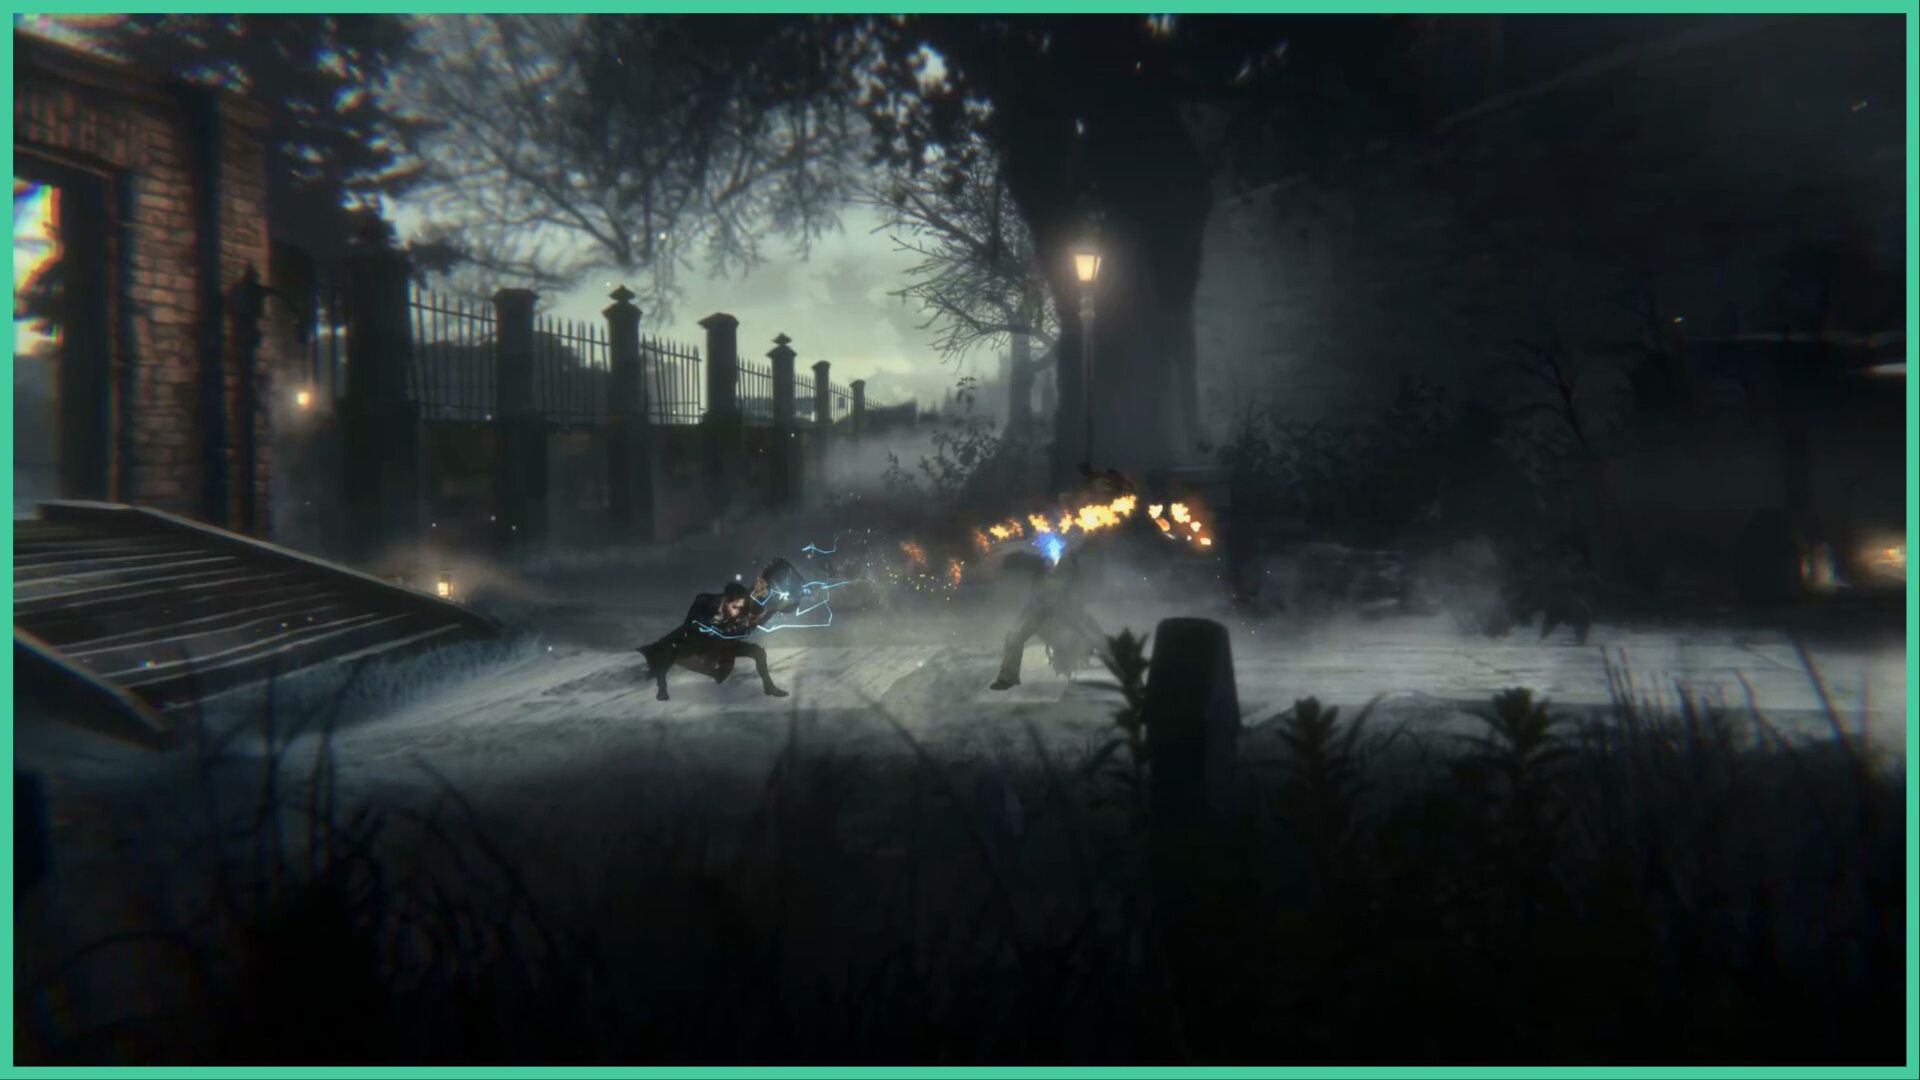 feature image for our vapor world: over the mind news, the image features a screenshot of the game as the main character blocks an oncoming attack from the enemy as fire coats the enemy with electric bolts around the main character, they are standing on a pathway surrounded by bushes, grass, and tree silhouettes, with a brick doorway and metal gates to the side, there is one streetlamp to light up the area